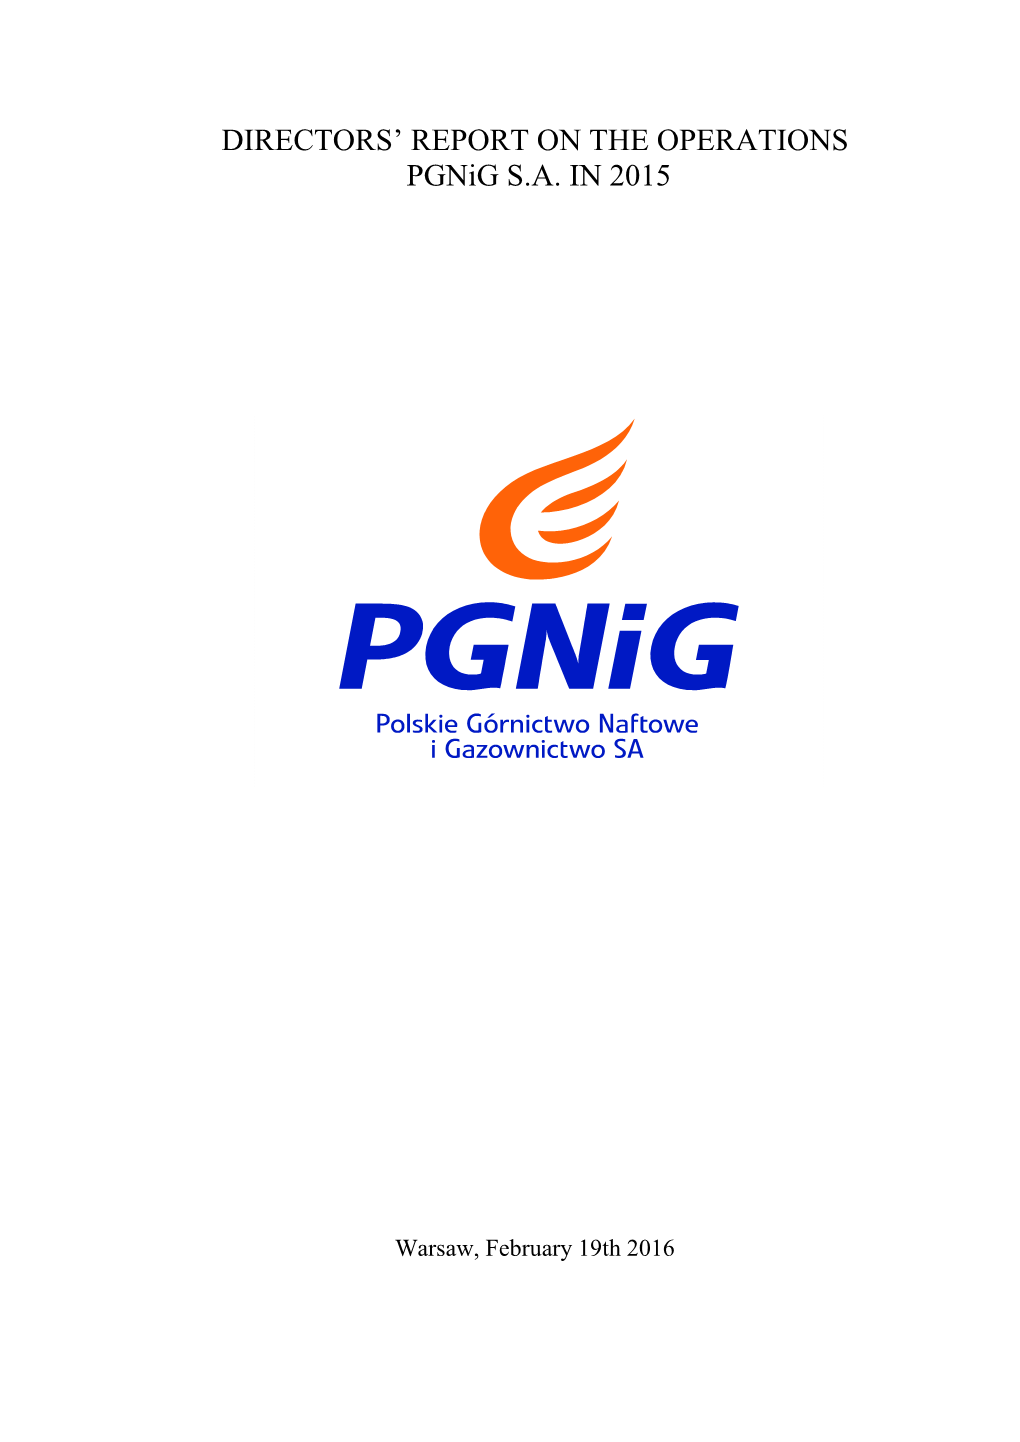 DIRECTORS' REPORT on the OPERATIONS Pgnig S.A. in 2015